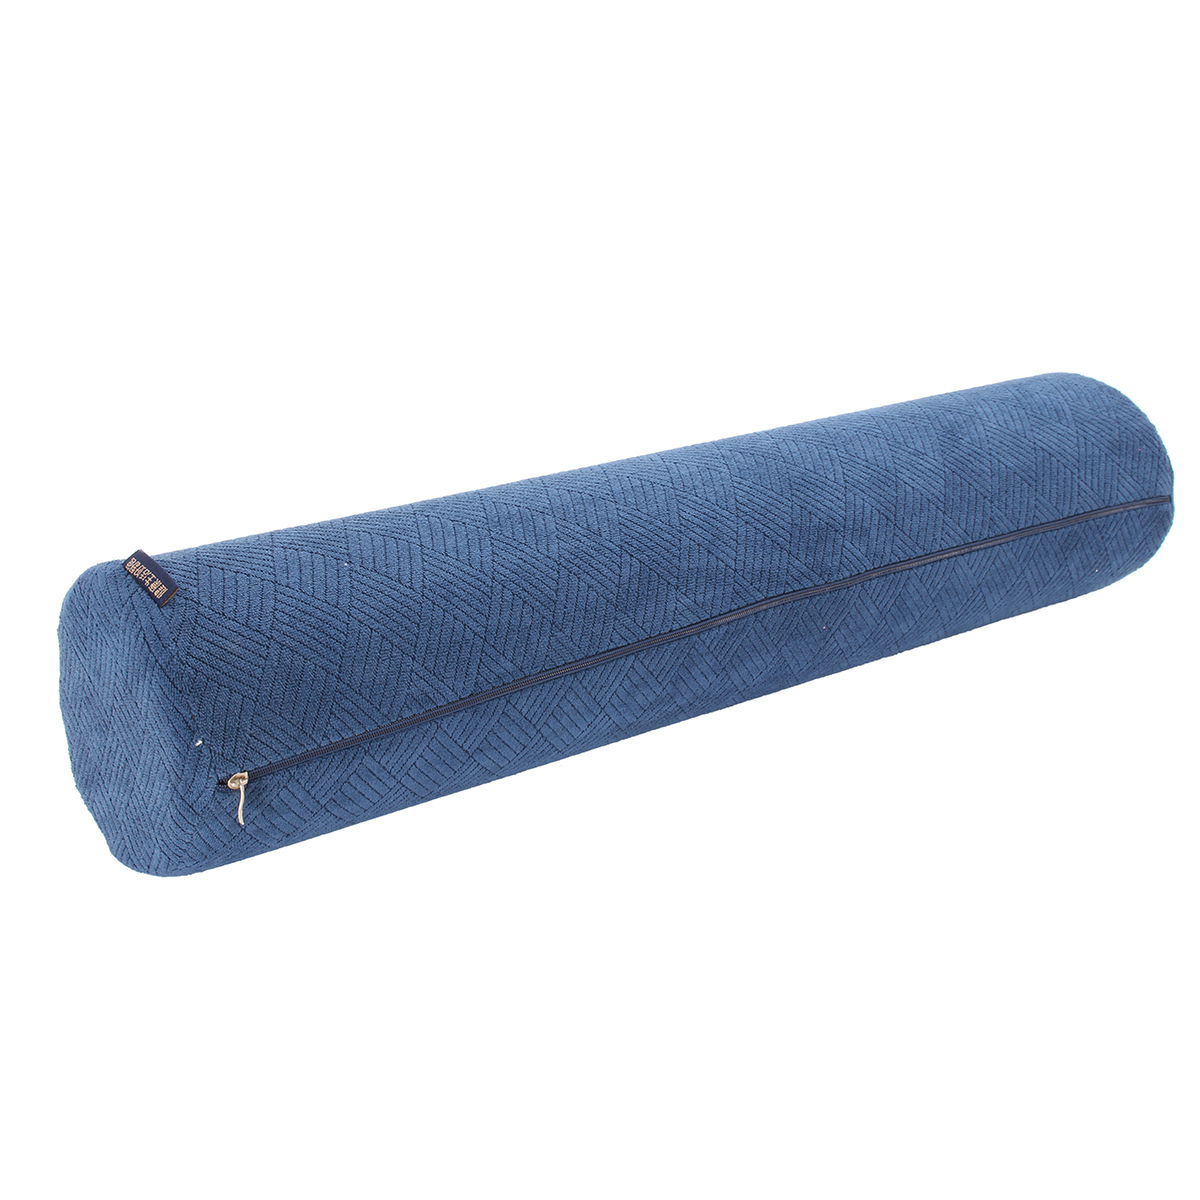 6012cm-Round-Cervical-Support-Sleeping-Positioning-Roll-Memory-Foam-Neck-Pillows-1234905